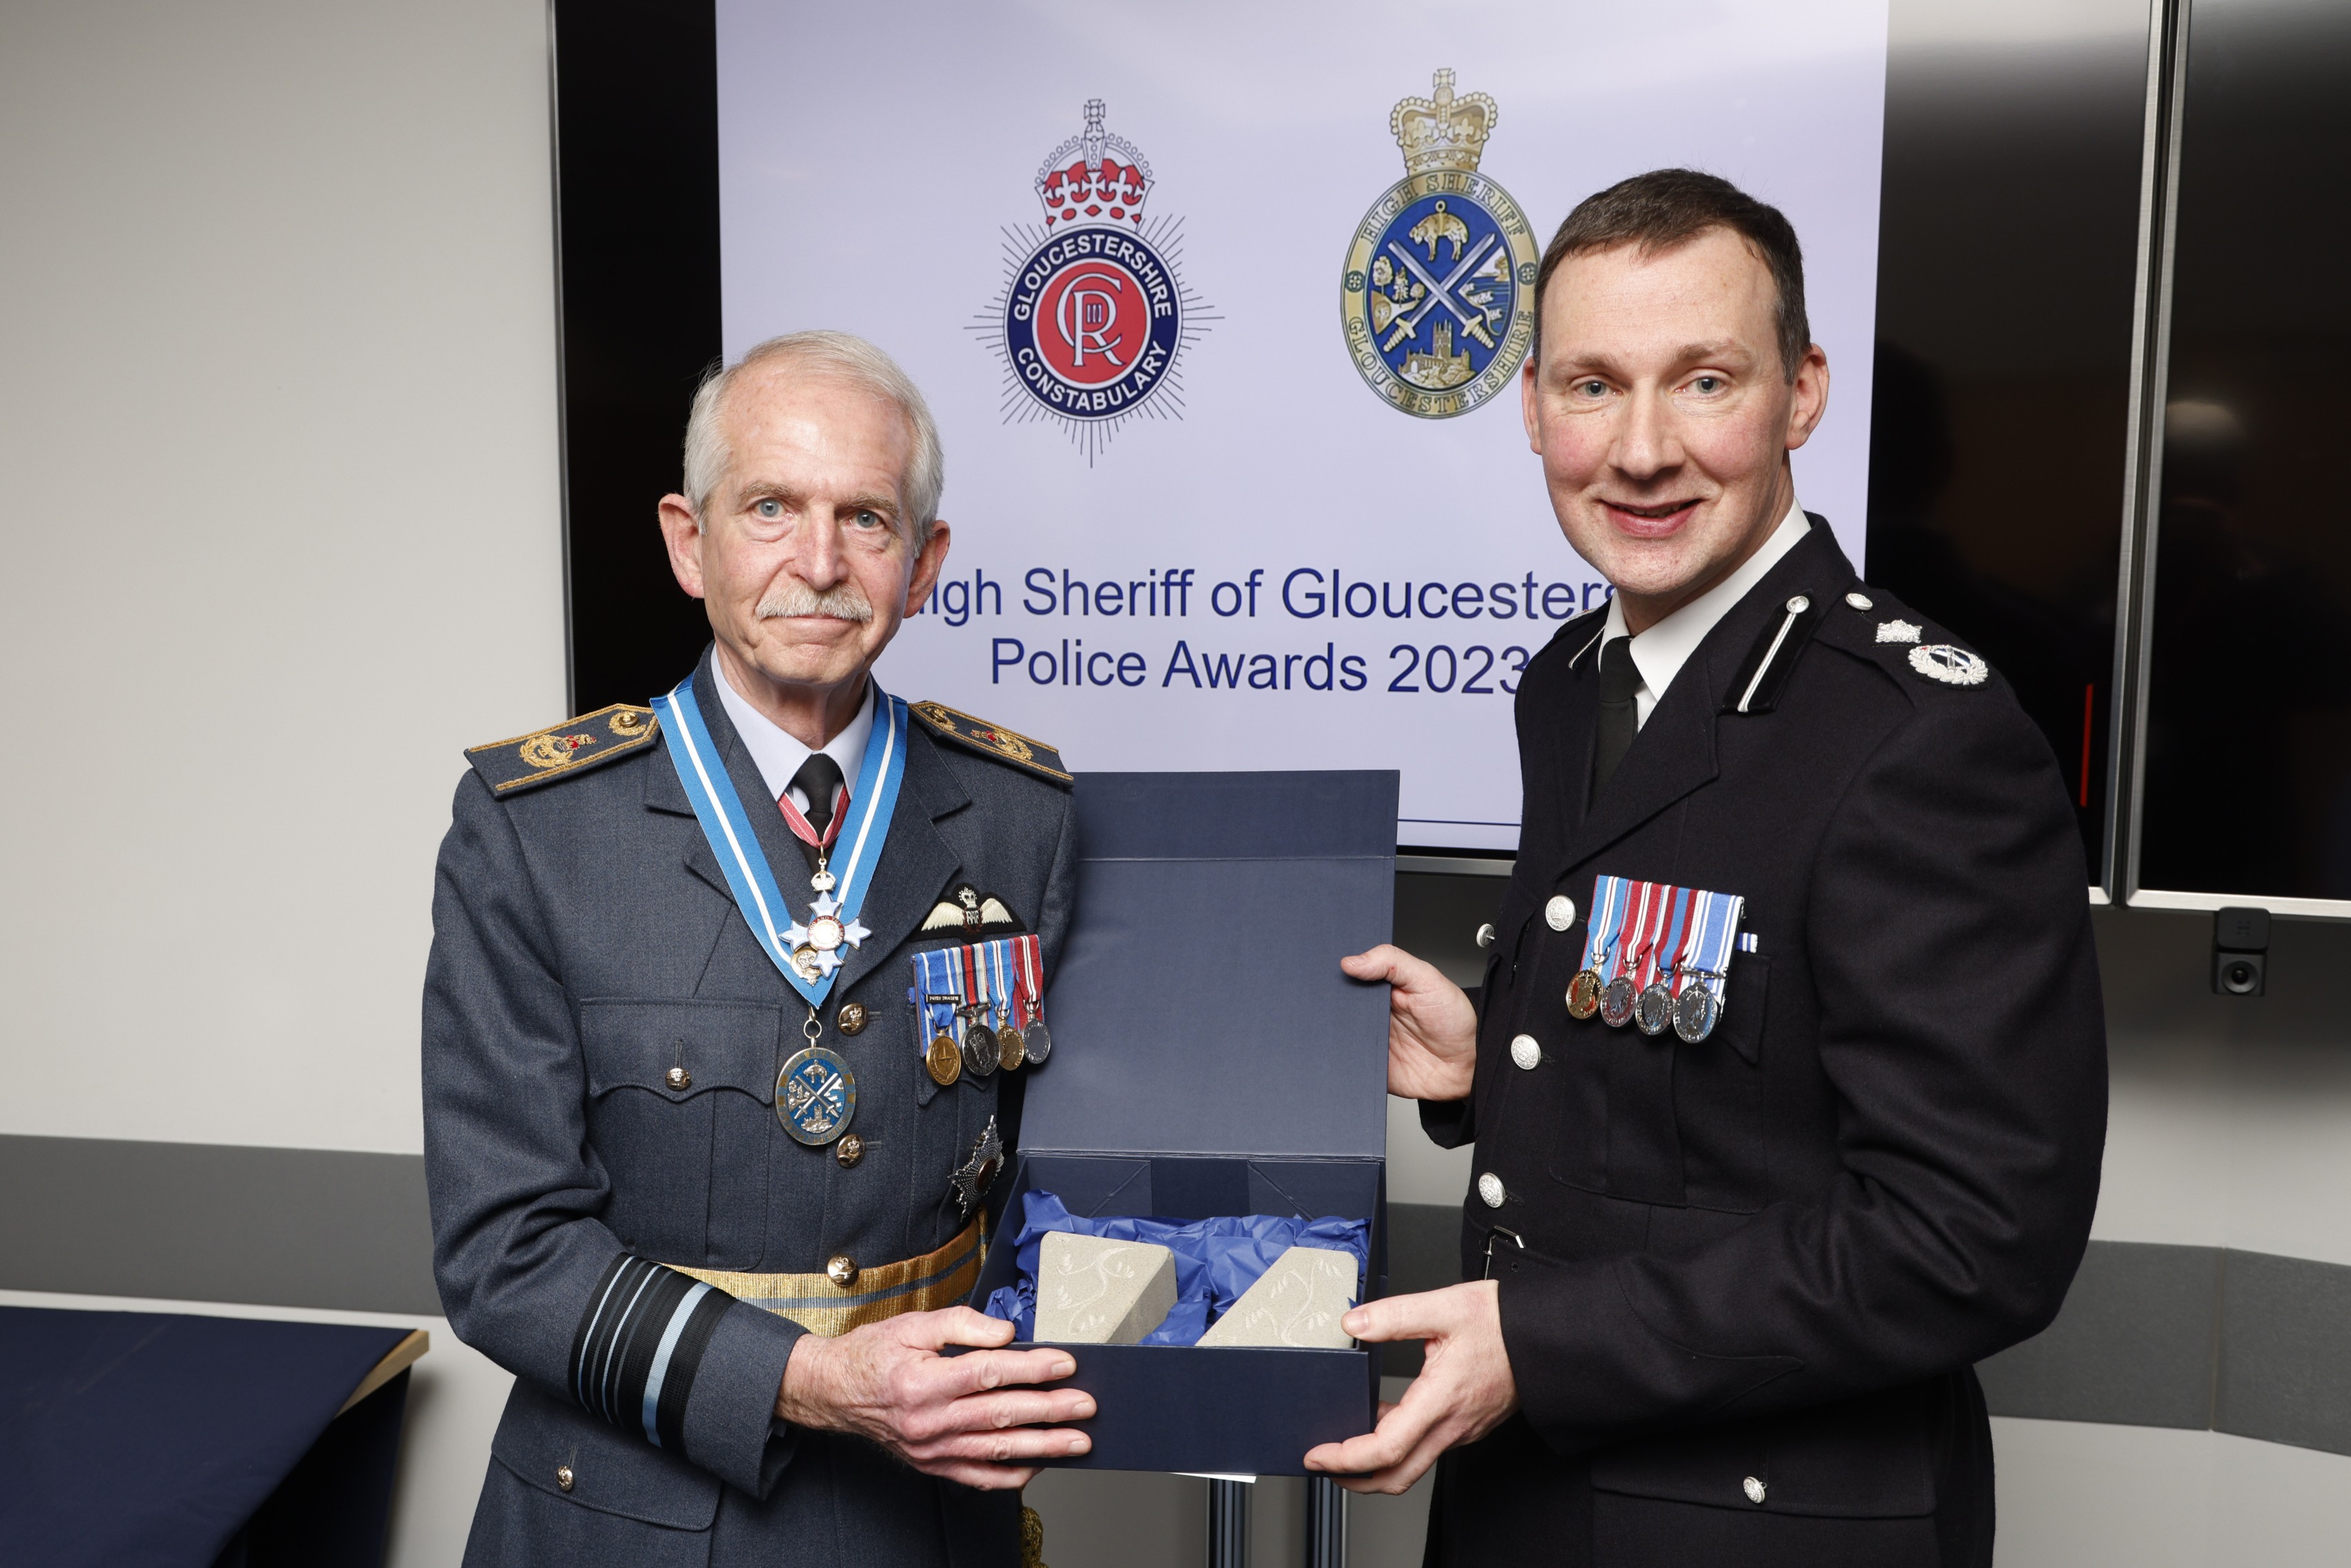 7 March 2023 – Having presented High Sheriff’s Awards to 20 highly deserving police officers, staff and volunteers, DCC Shaun West surprised me with a gift of a pair of bookends hand-carved from local stone.